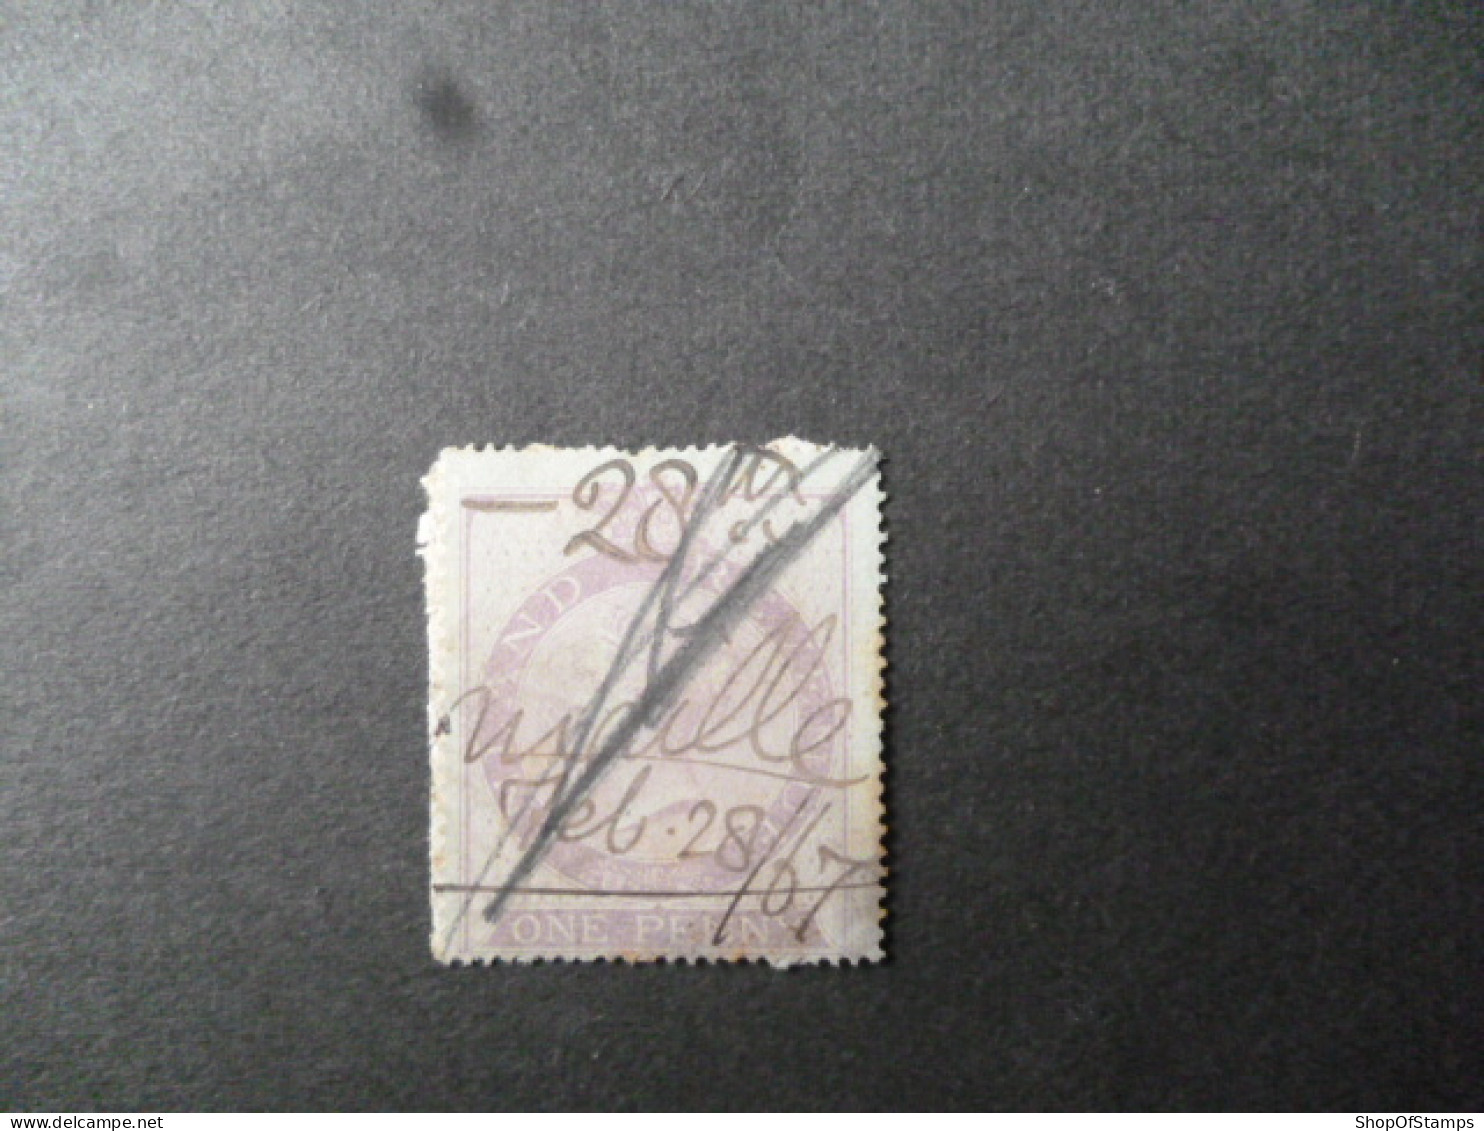 GREAT BRITAIN REVENUE USED DATE 1867 - Fiscale Zegels